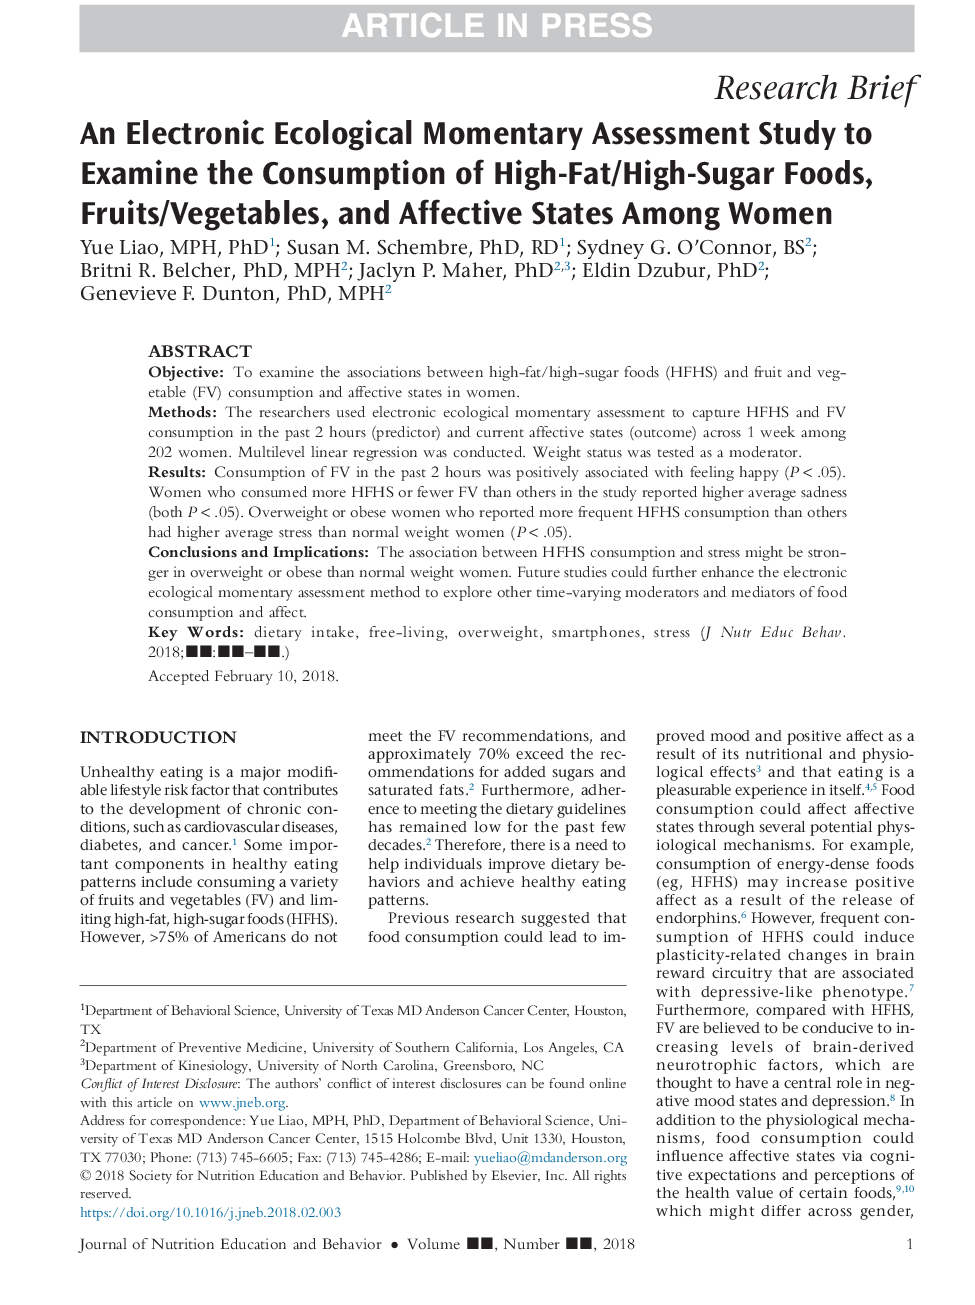 An Electronic Ecological Momentary Assessment Study to Examine the Consumption of High-Fat/High-Sugar Foods, Fruits/Vegetables, and Affective States Among Women